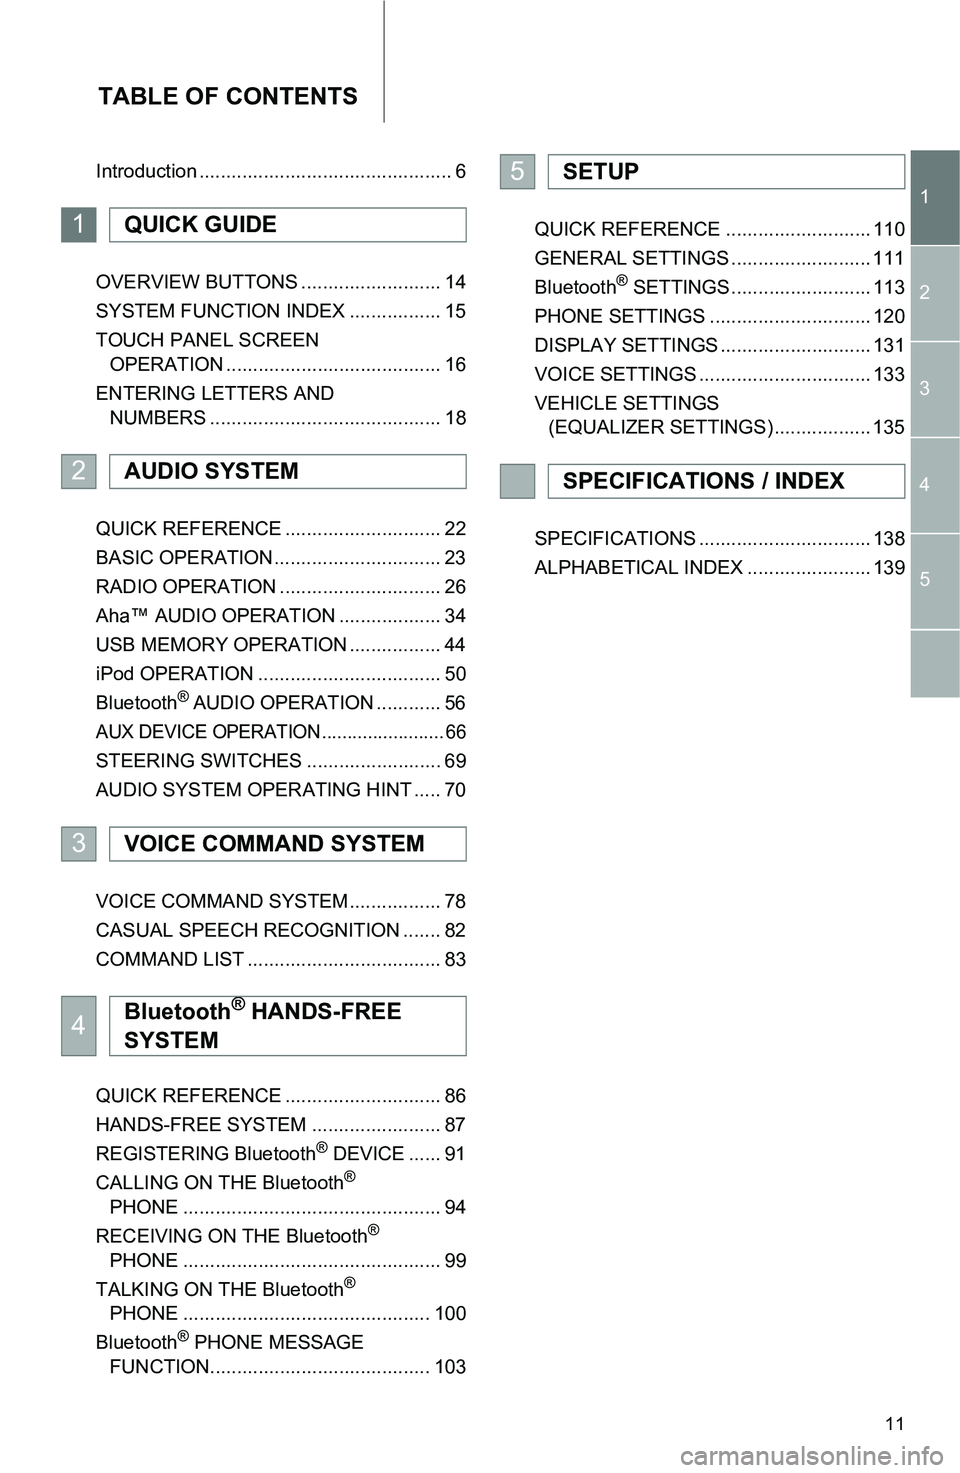 TOYOTA iM 2016  Accessories, Audio & Navigation (in English) 11
TABLE OF CONTENTS
1
2
3
4
5 Introduction ............................................... 6
OVERVIEW BUTTONS .......................... 14
SYSTEM FUNCTION INDEX ................. 15
TOUCH PANEL SCRE